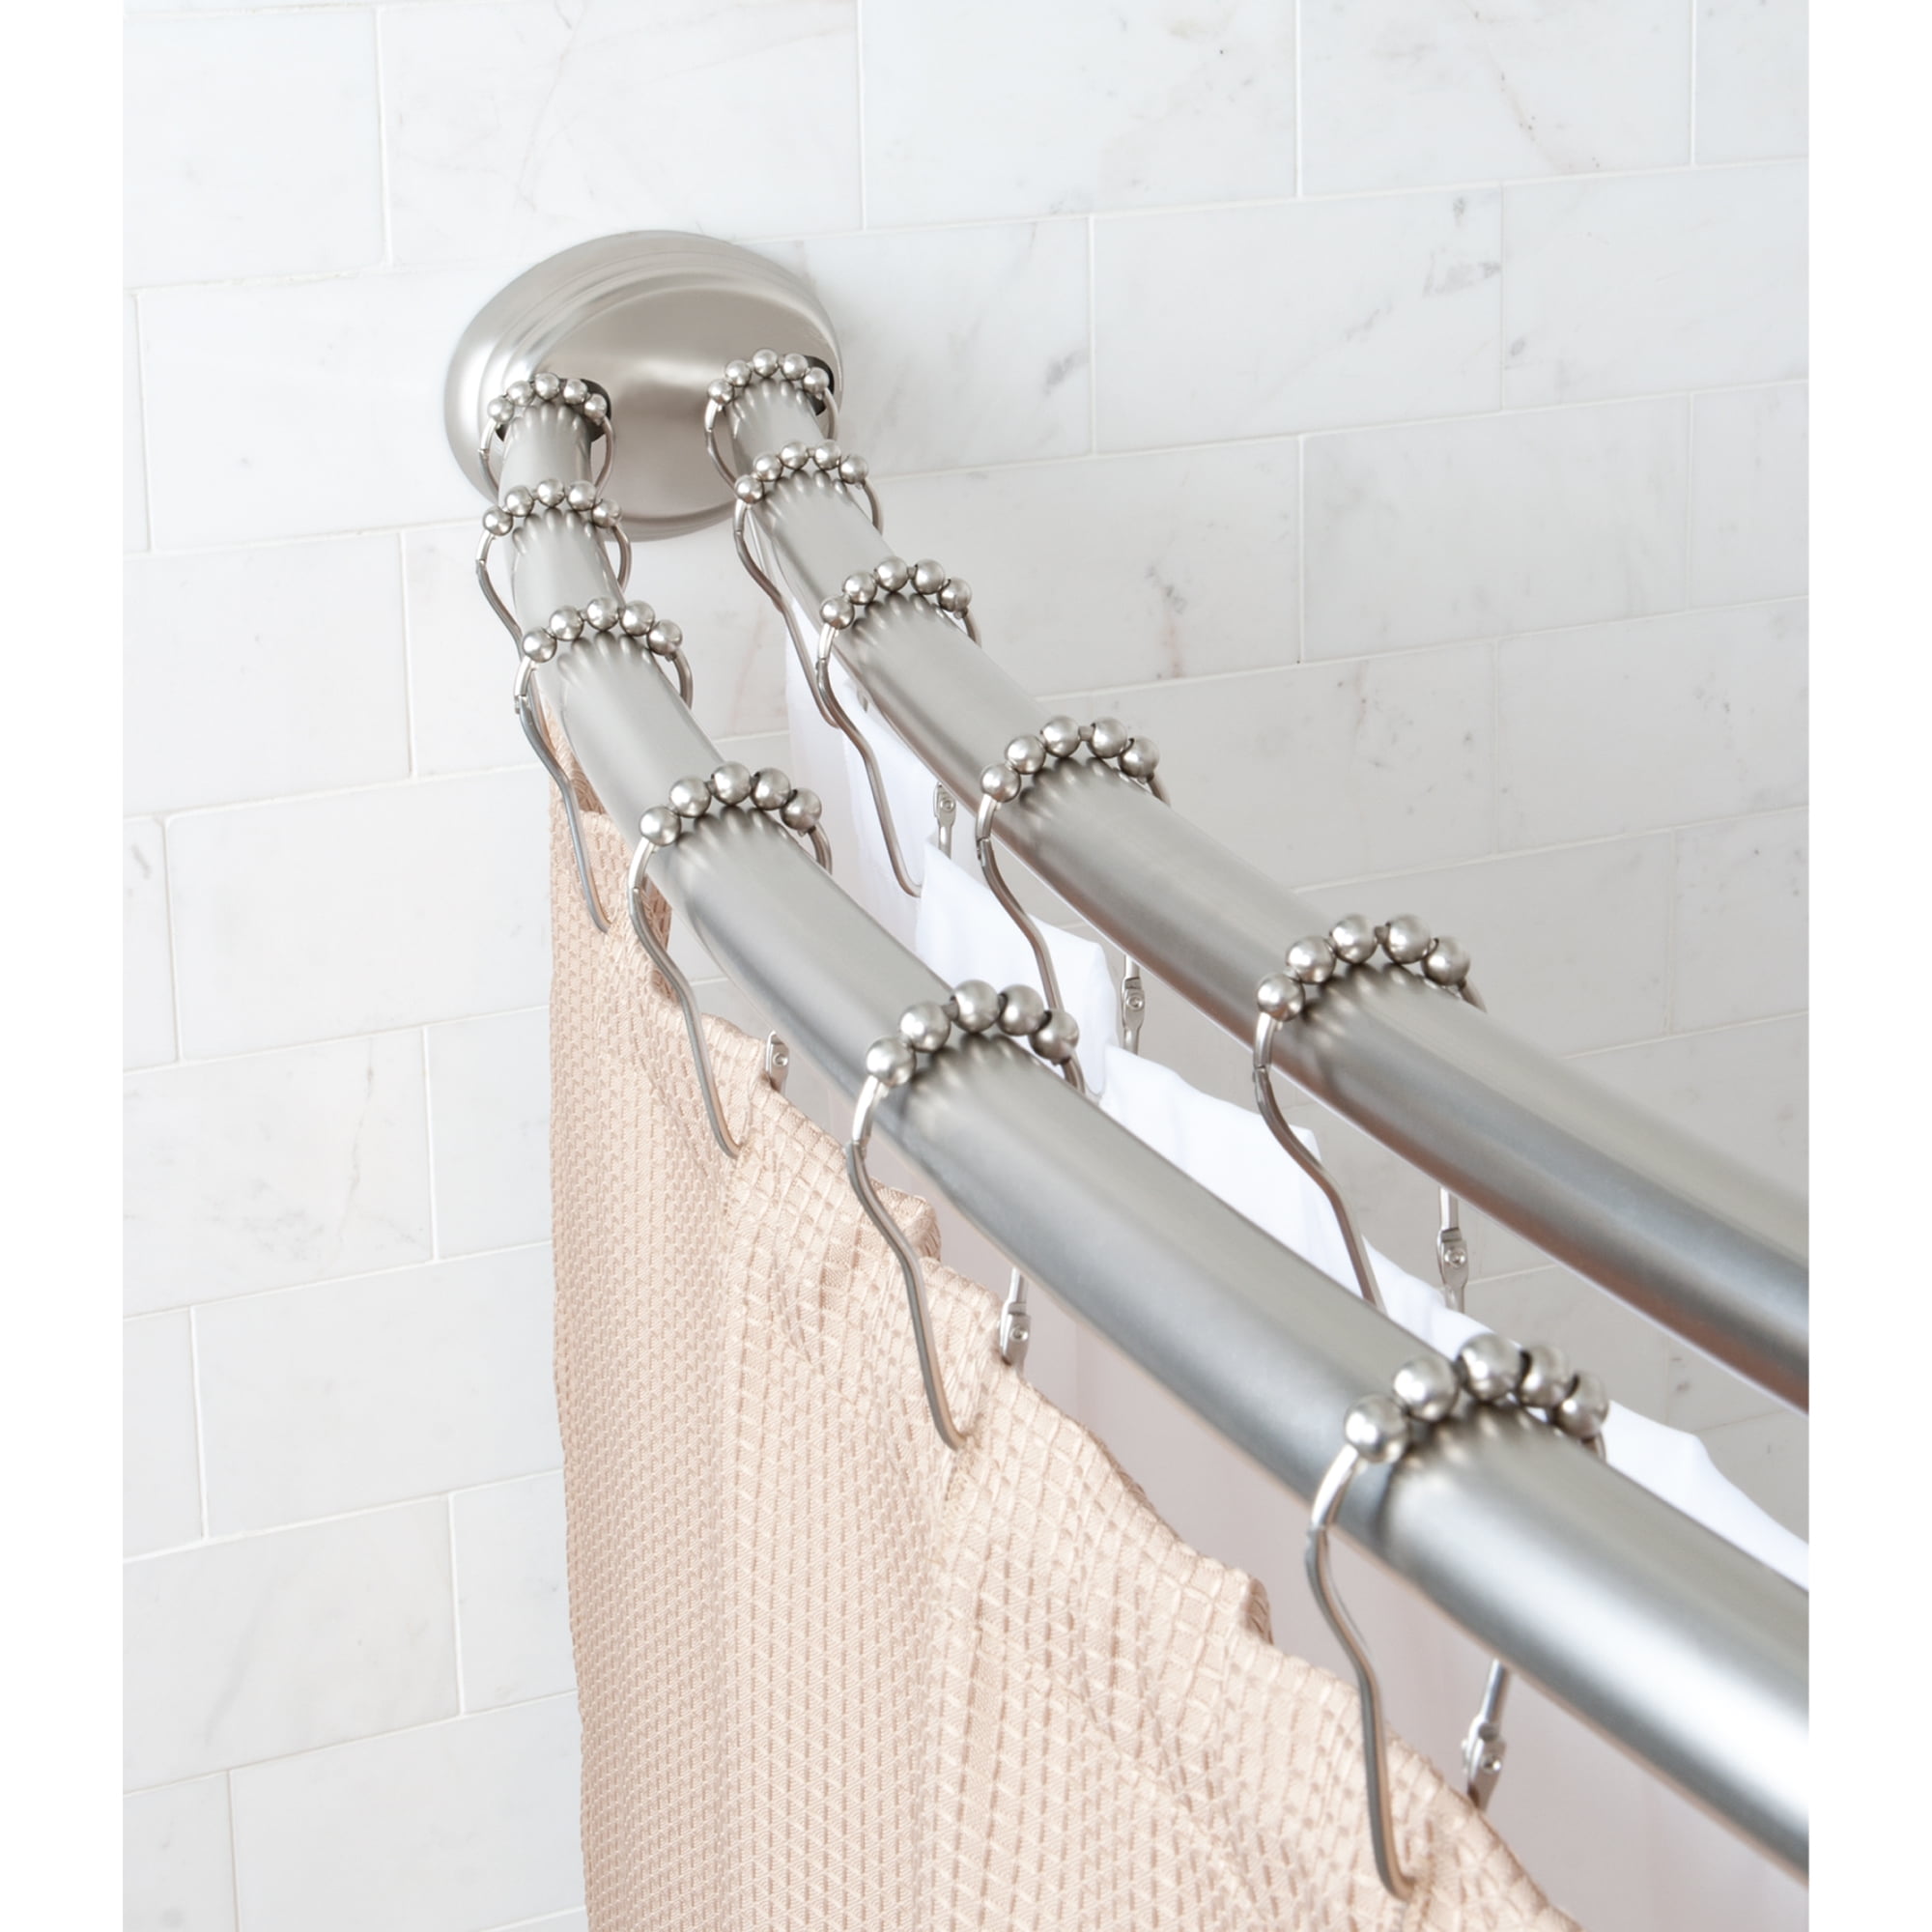 Better Homes Gardens Double Curved, Tension Shower Curtain Pole